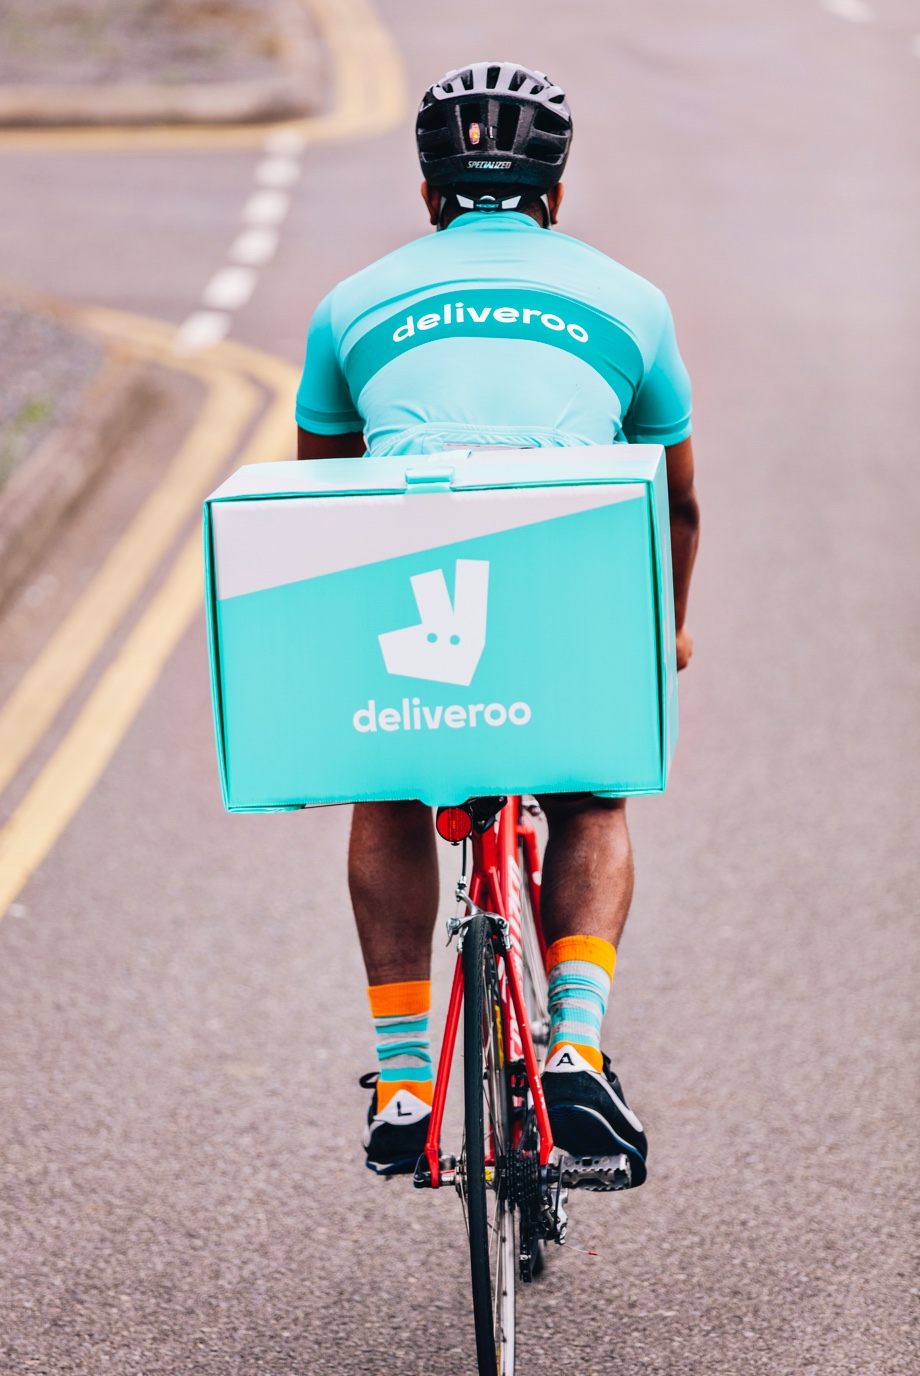 deliveroo interview case study